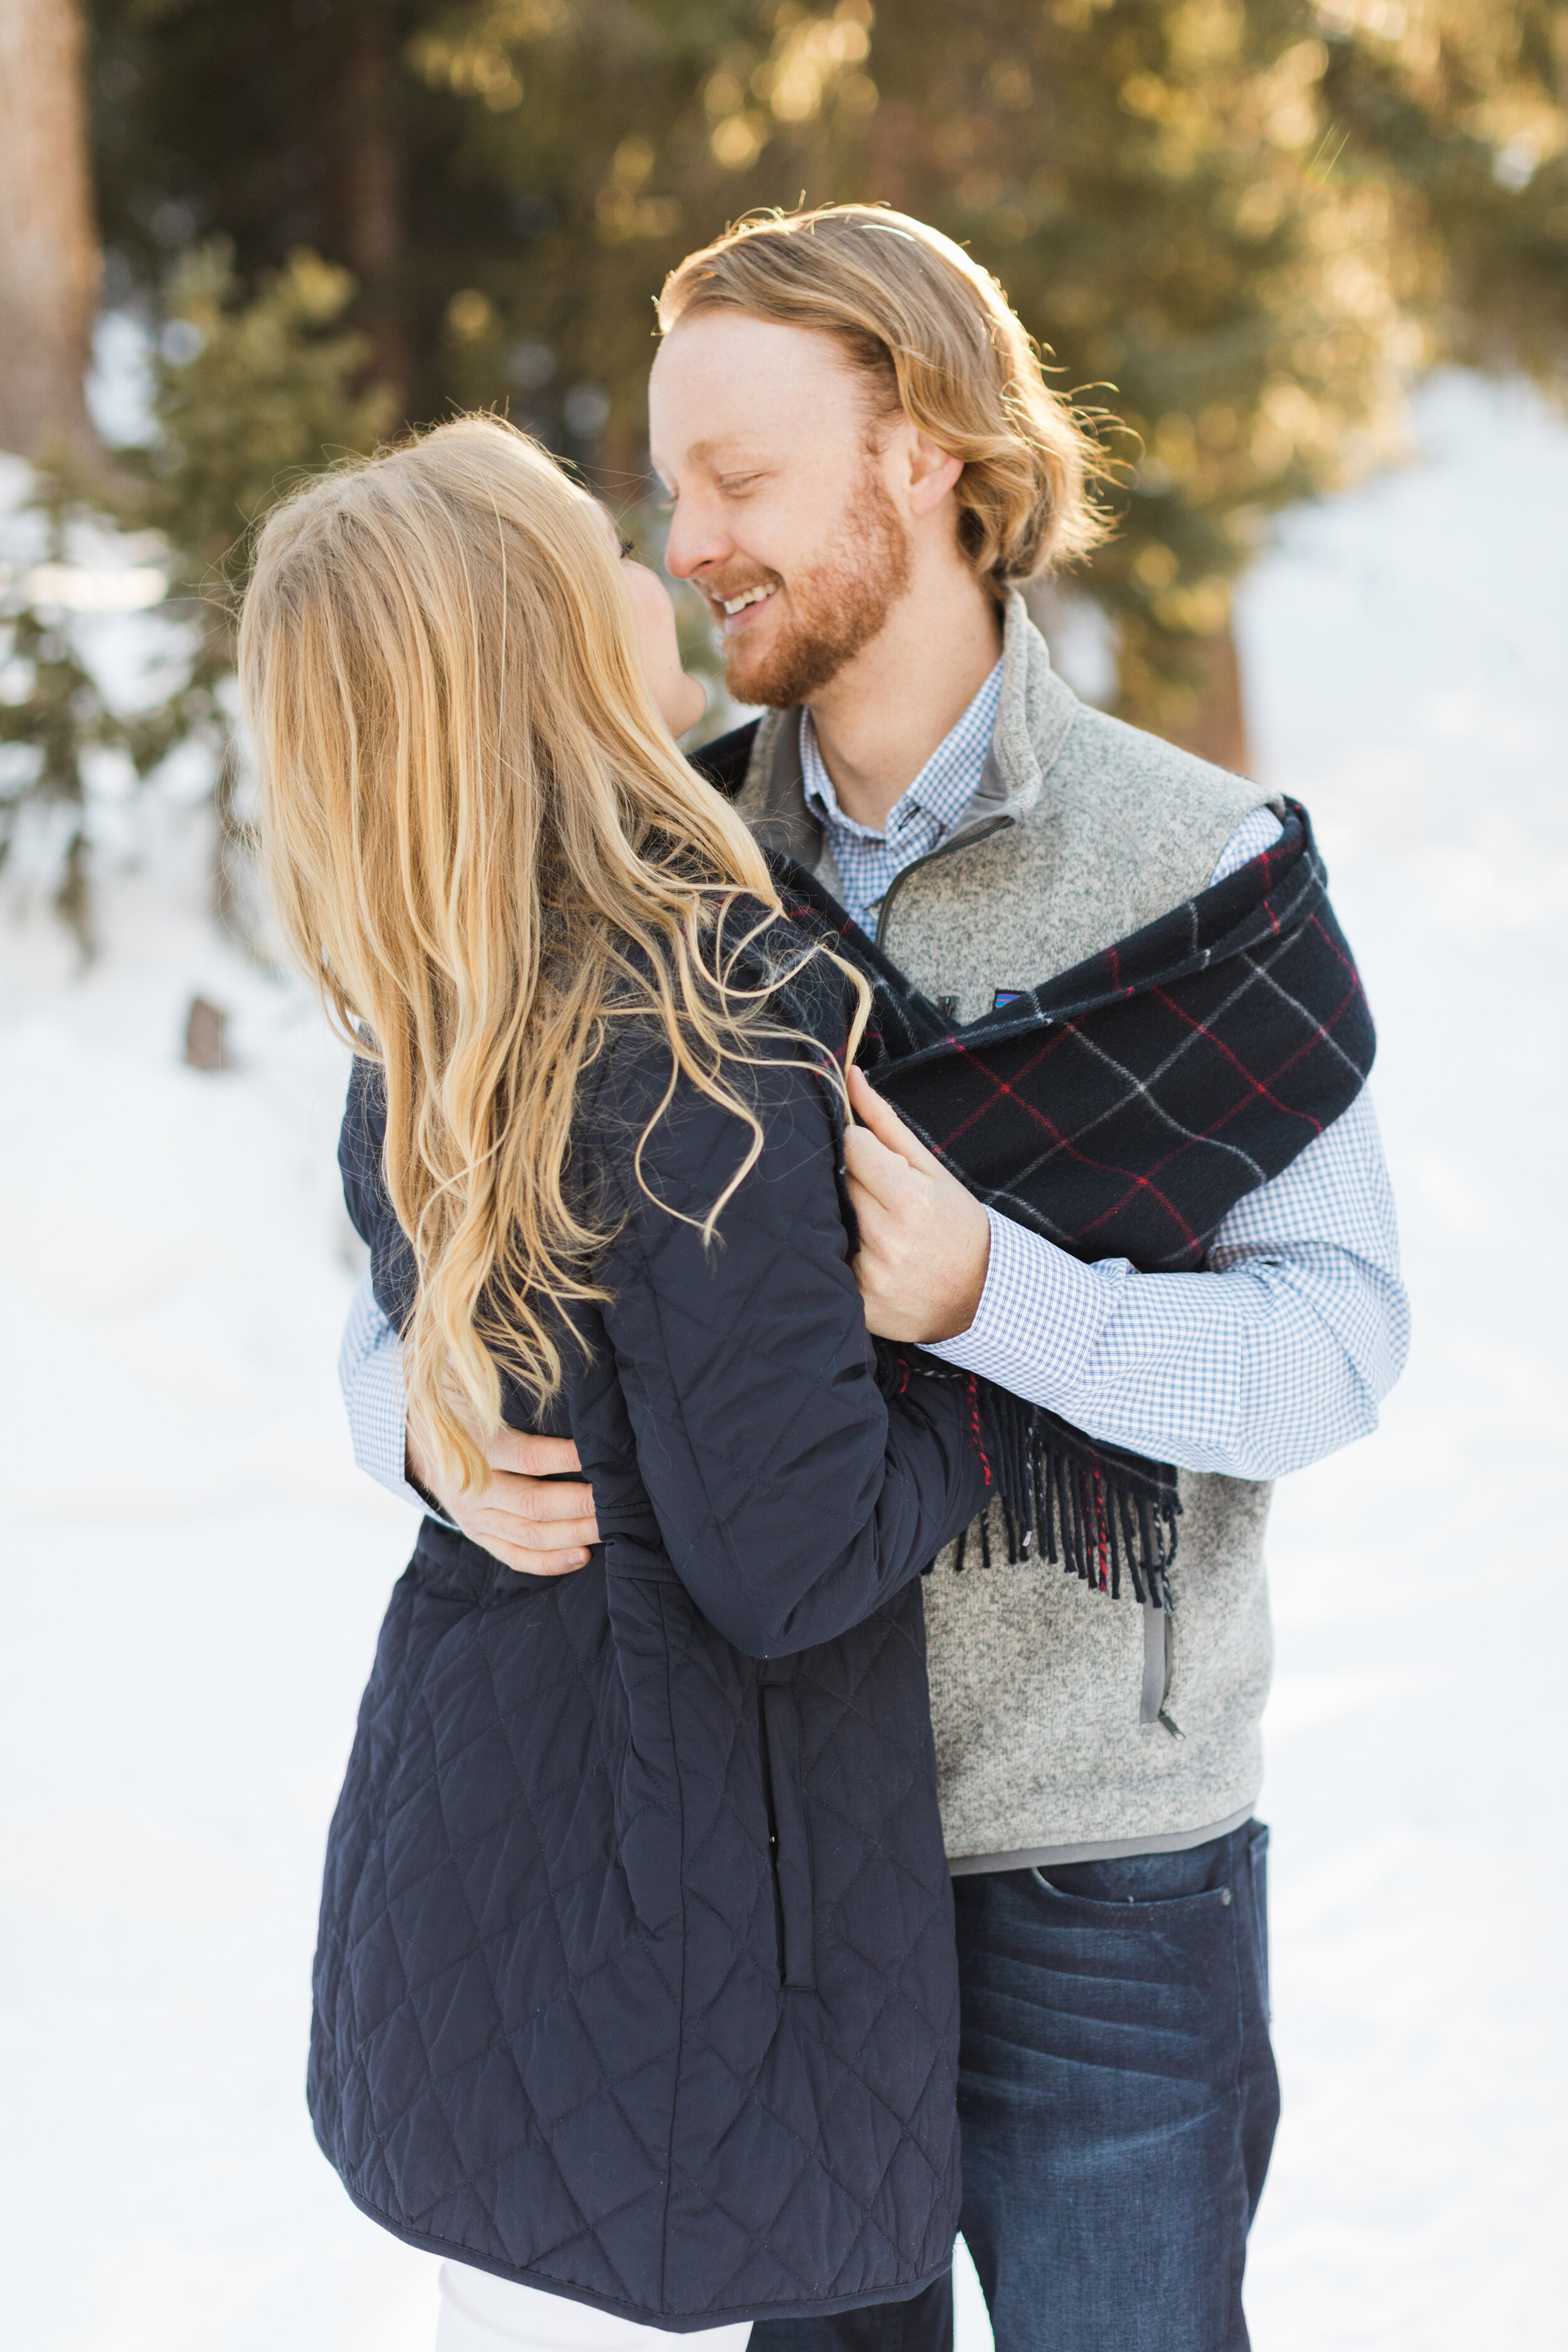 snowy-colorado-engagement-photos-in-the-forest-by-jackie-cooper-photo-04.jpg